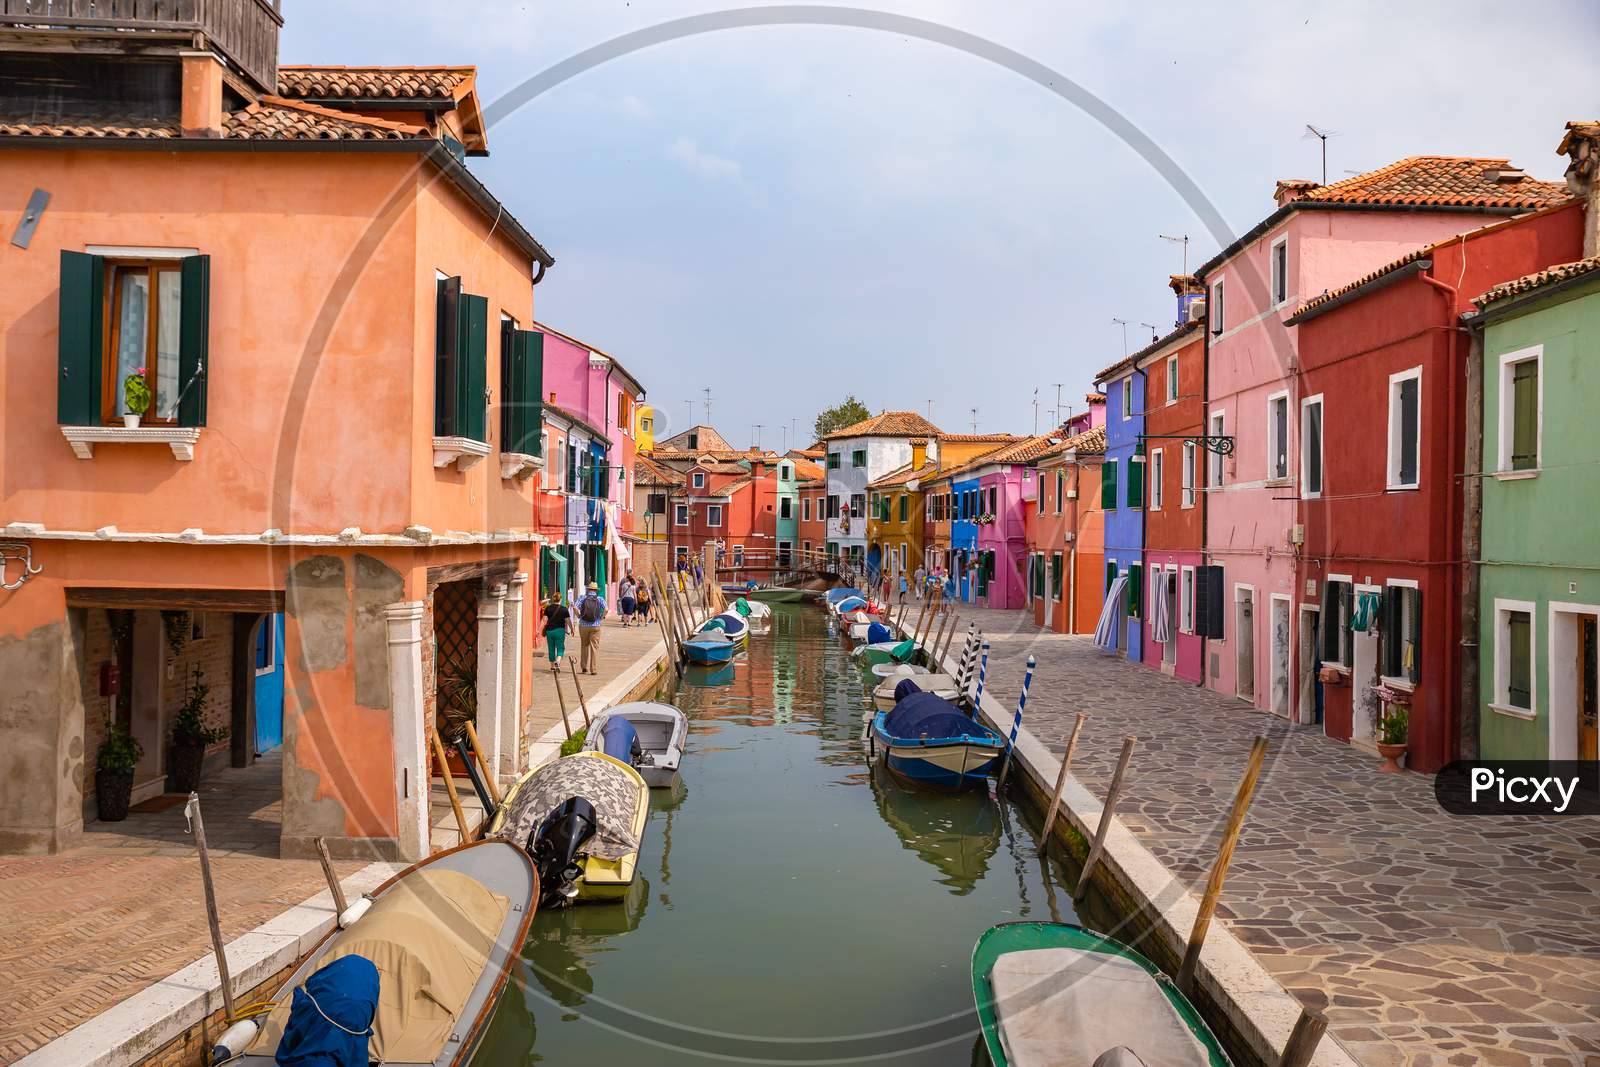 Burano, Italy - 09-18-2019 Colorful Houses By Canal In Burano, Italy. Burano Is An Island In The Venetian Lagoon And Is Known For Its Lace Work And Brightly Colored Homes.